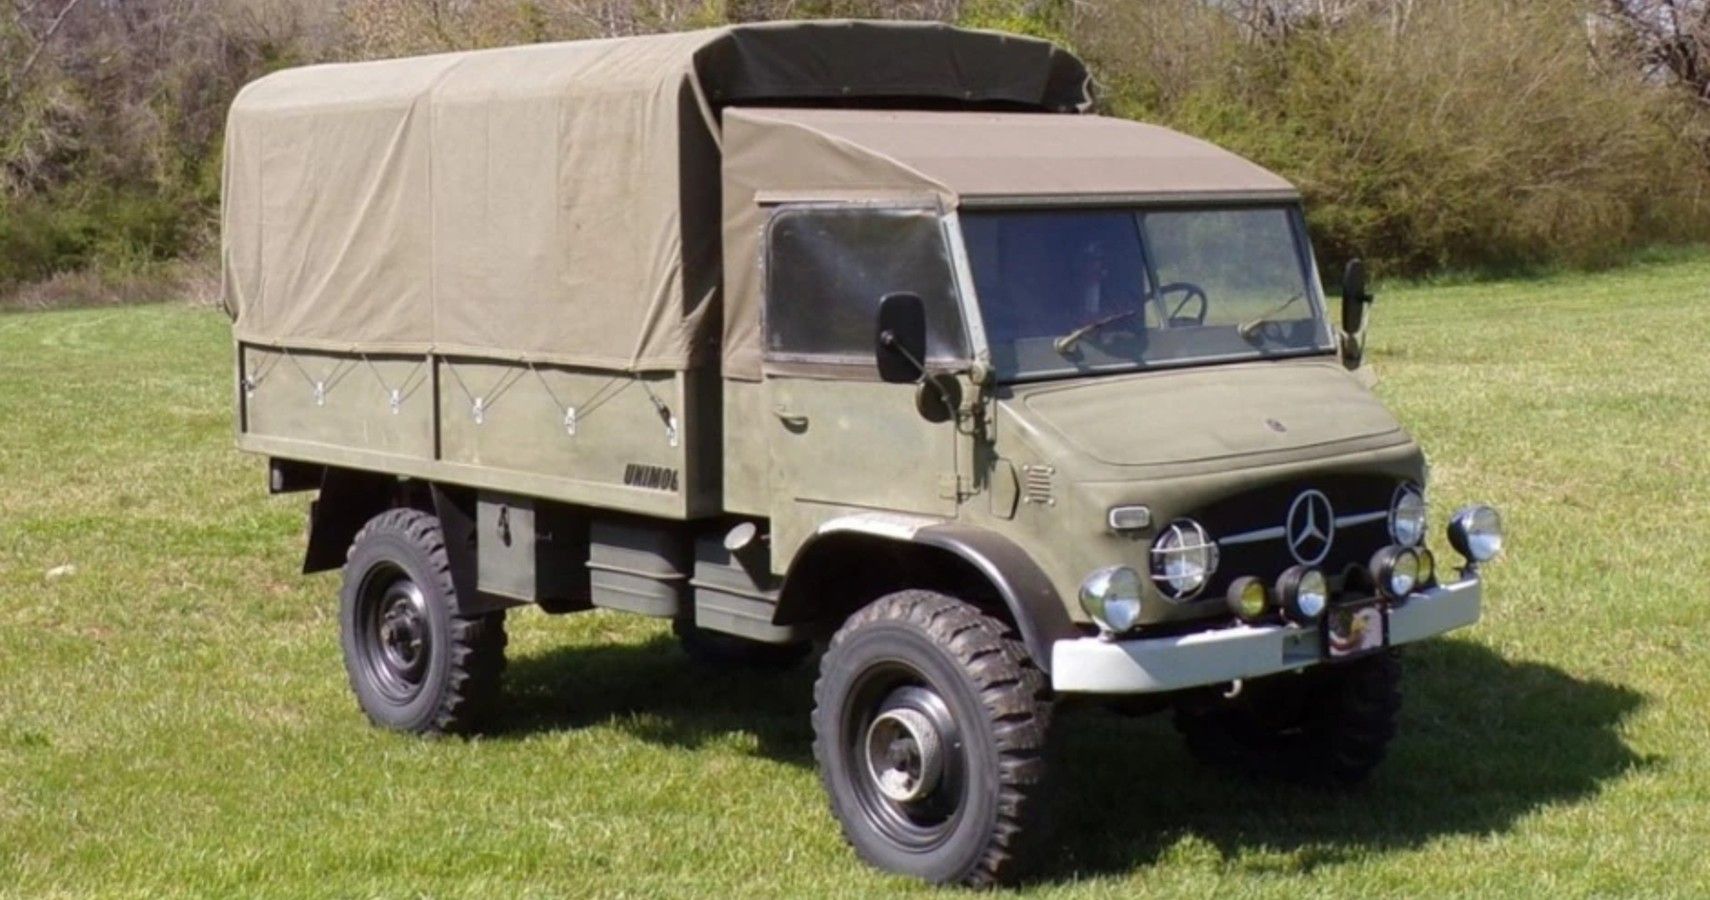 Here Are 18 Of The Cheapest Military Vehicles Civilians Can Buy